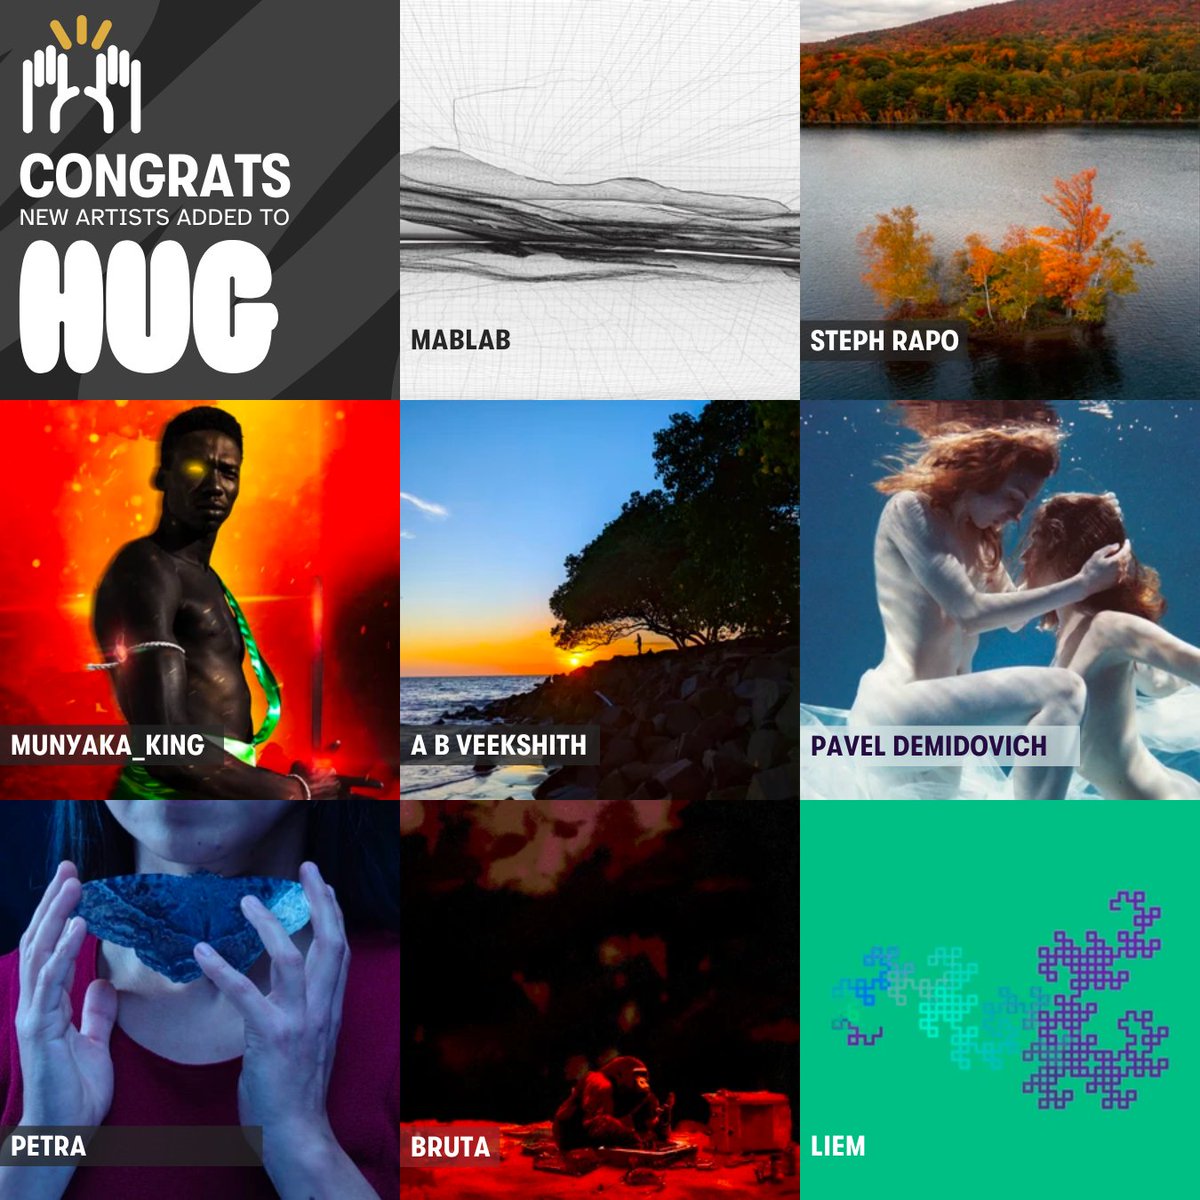 Congratulations to the latest artists curated by our community and added to HUG 🎊

@mablabart
@stephrapo
Munyaka King
@Veekshith6
@demidovich_film
@luisbetx9
@brutalisti
@clockwisechaos

Welcome! We can't wait to see how you customize your profiles 🤗